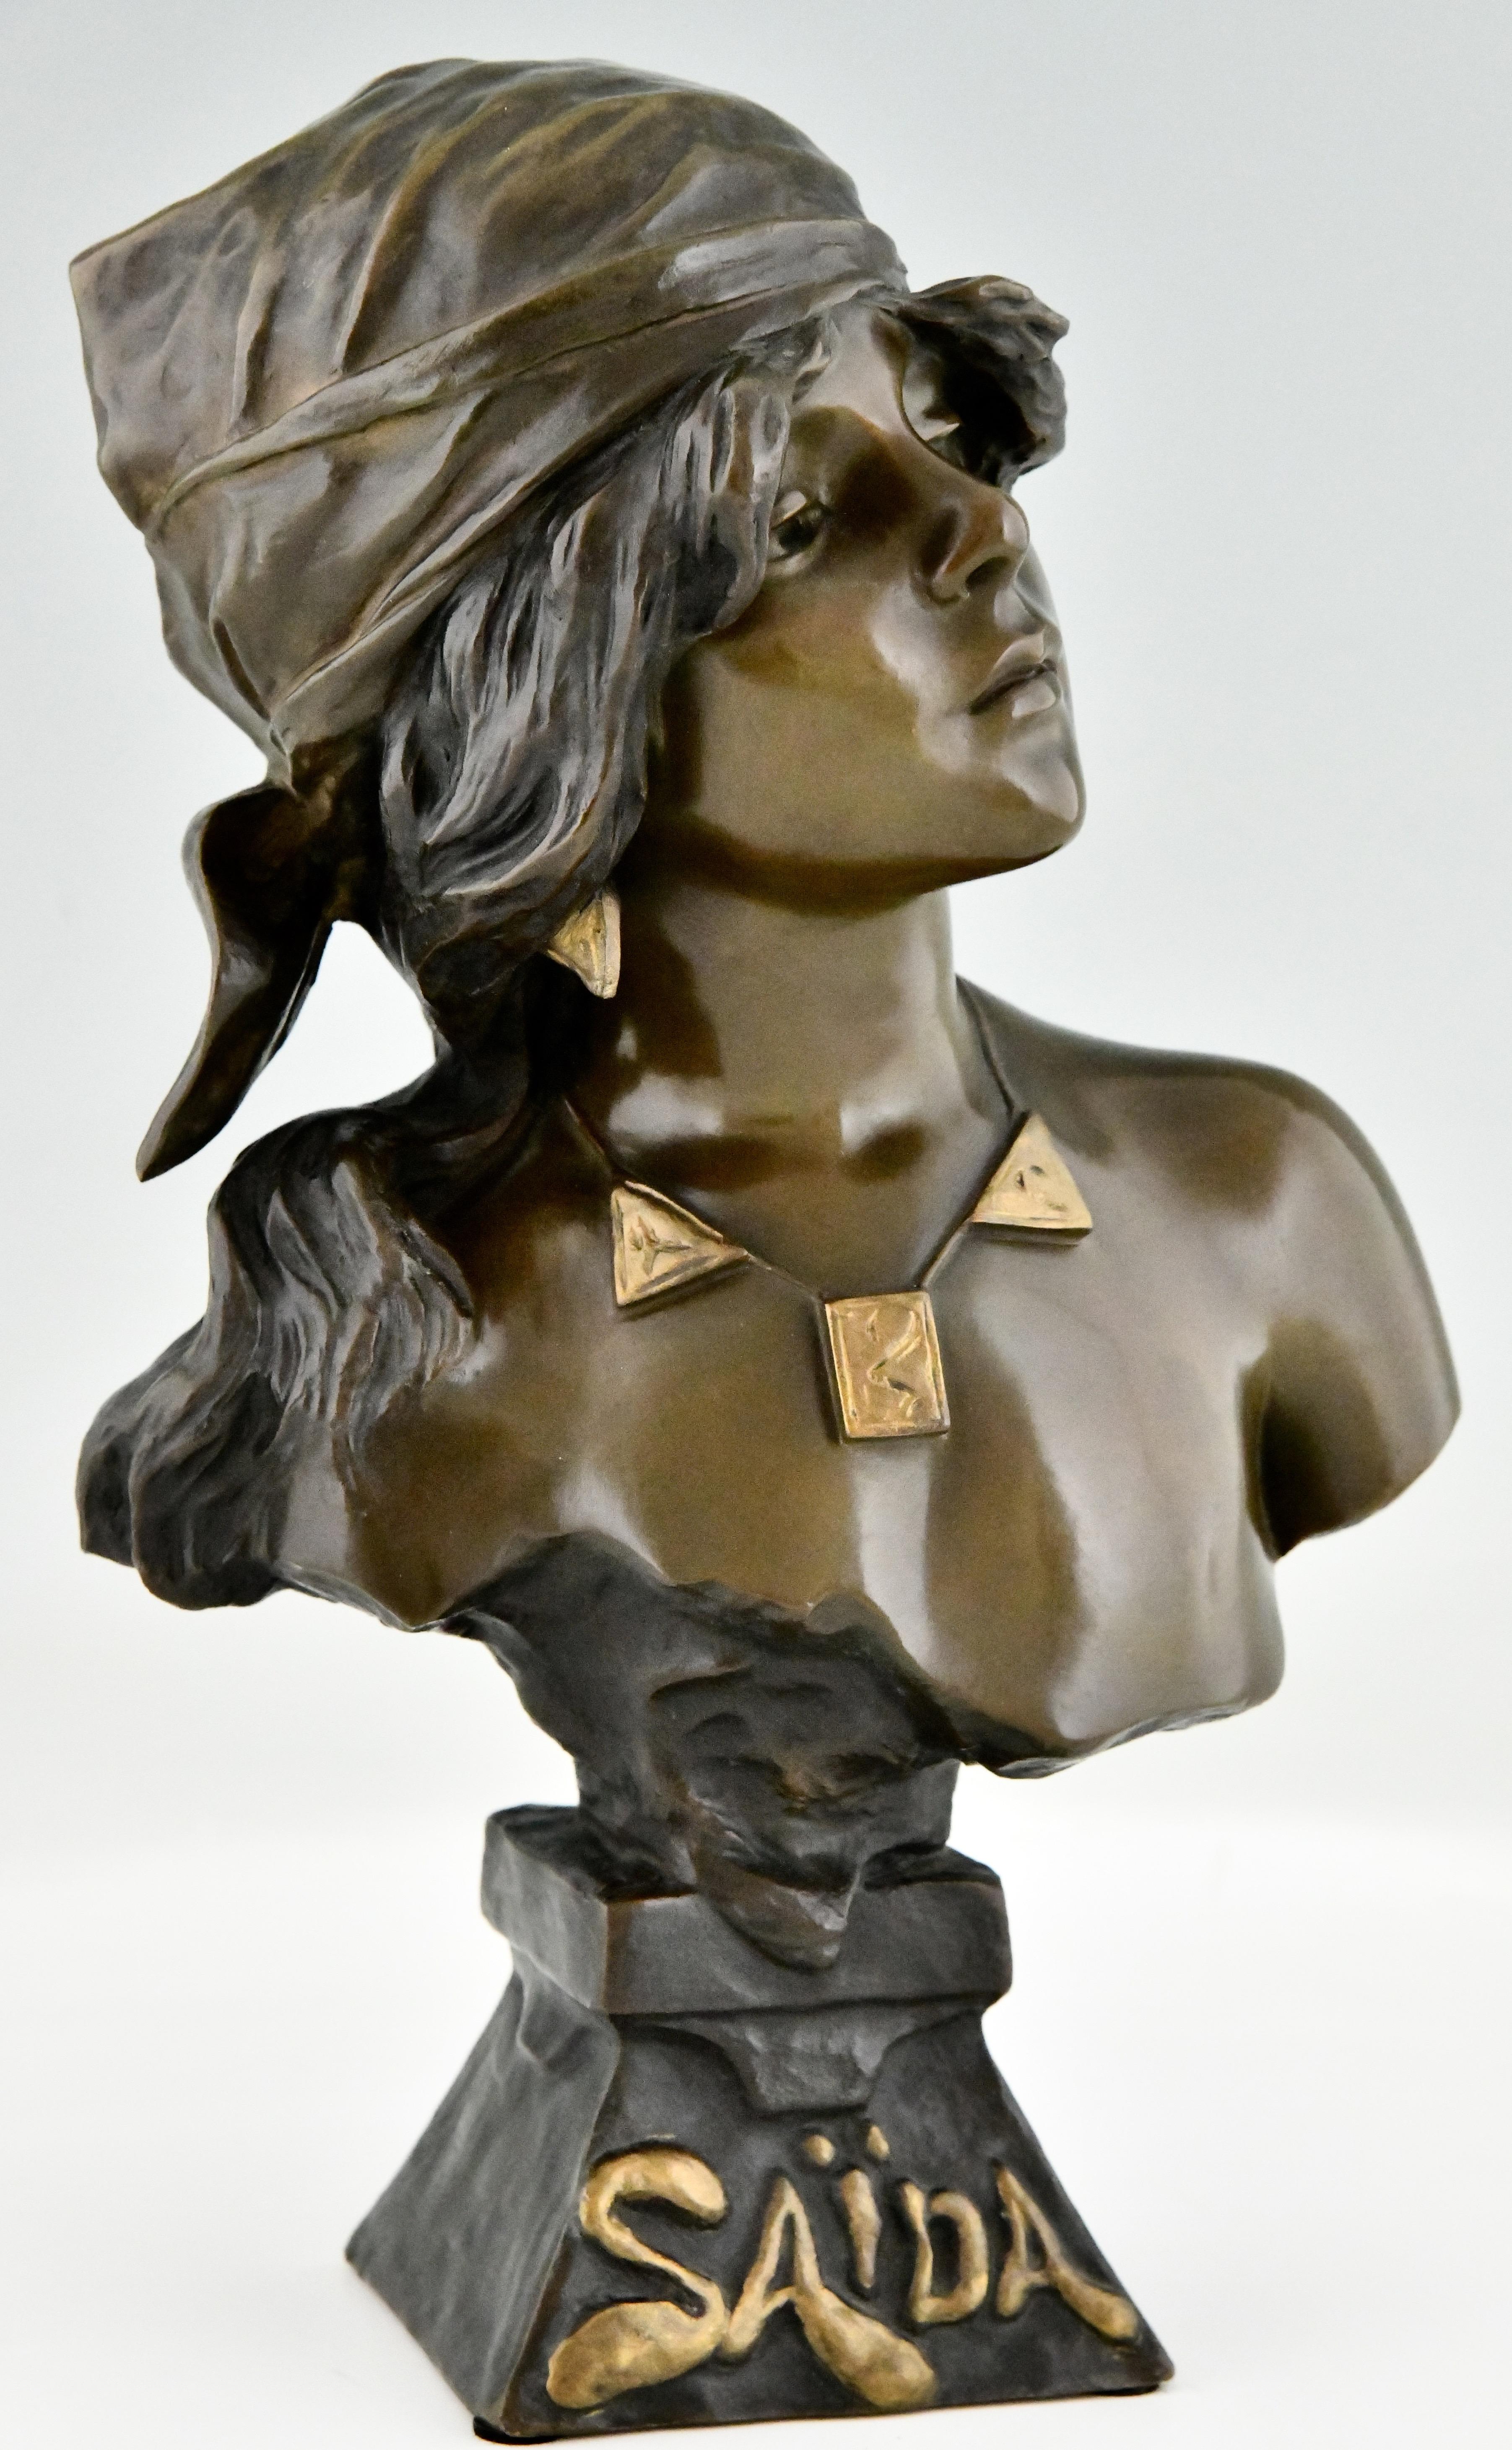 Art Nouveau bronze bust of a girl Saïda by Emmanuel Villanis.
With the foundry seal of the Société des bronzes de Paris.
AP for the founder
Numbered 5189
Bronze with multicolor patina. 
France 1890. 
Illustration of this model on page  of